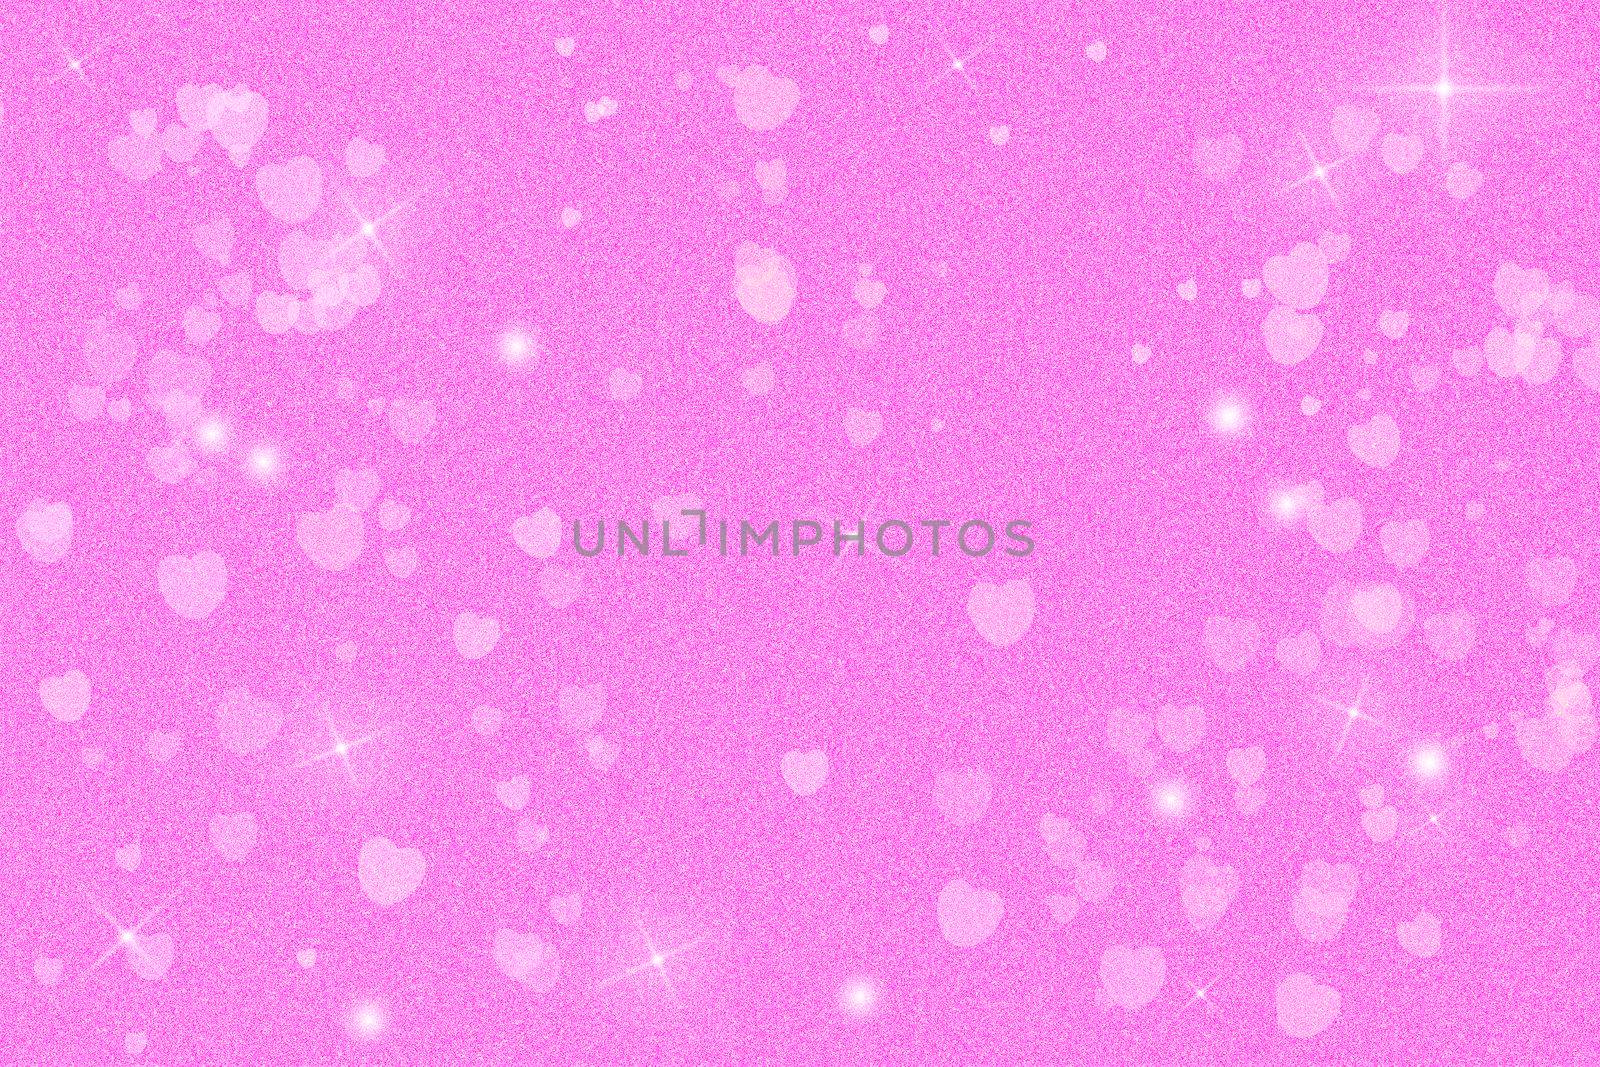 Abstract bright pink background with hearts and shimmer.